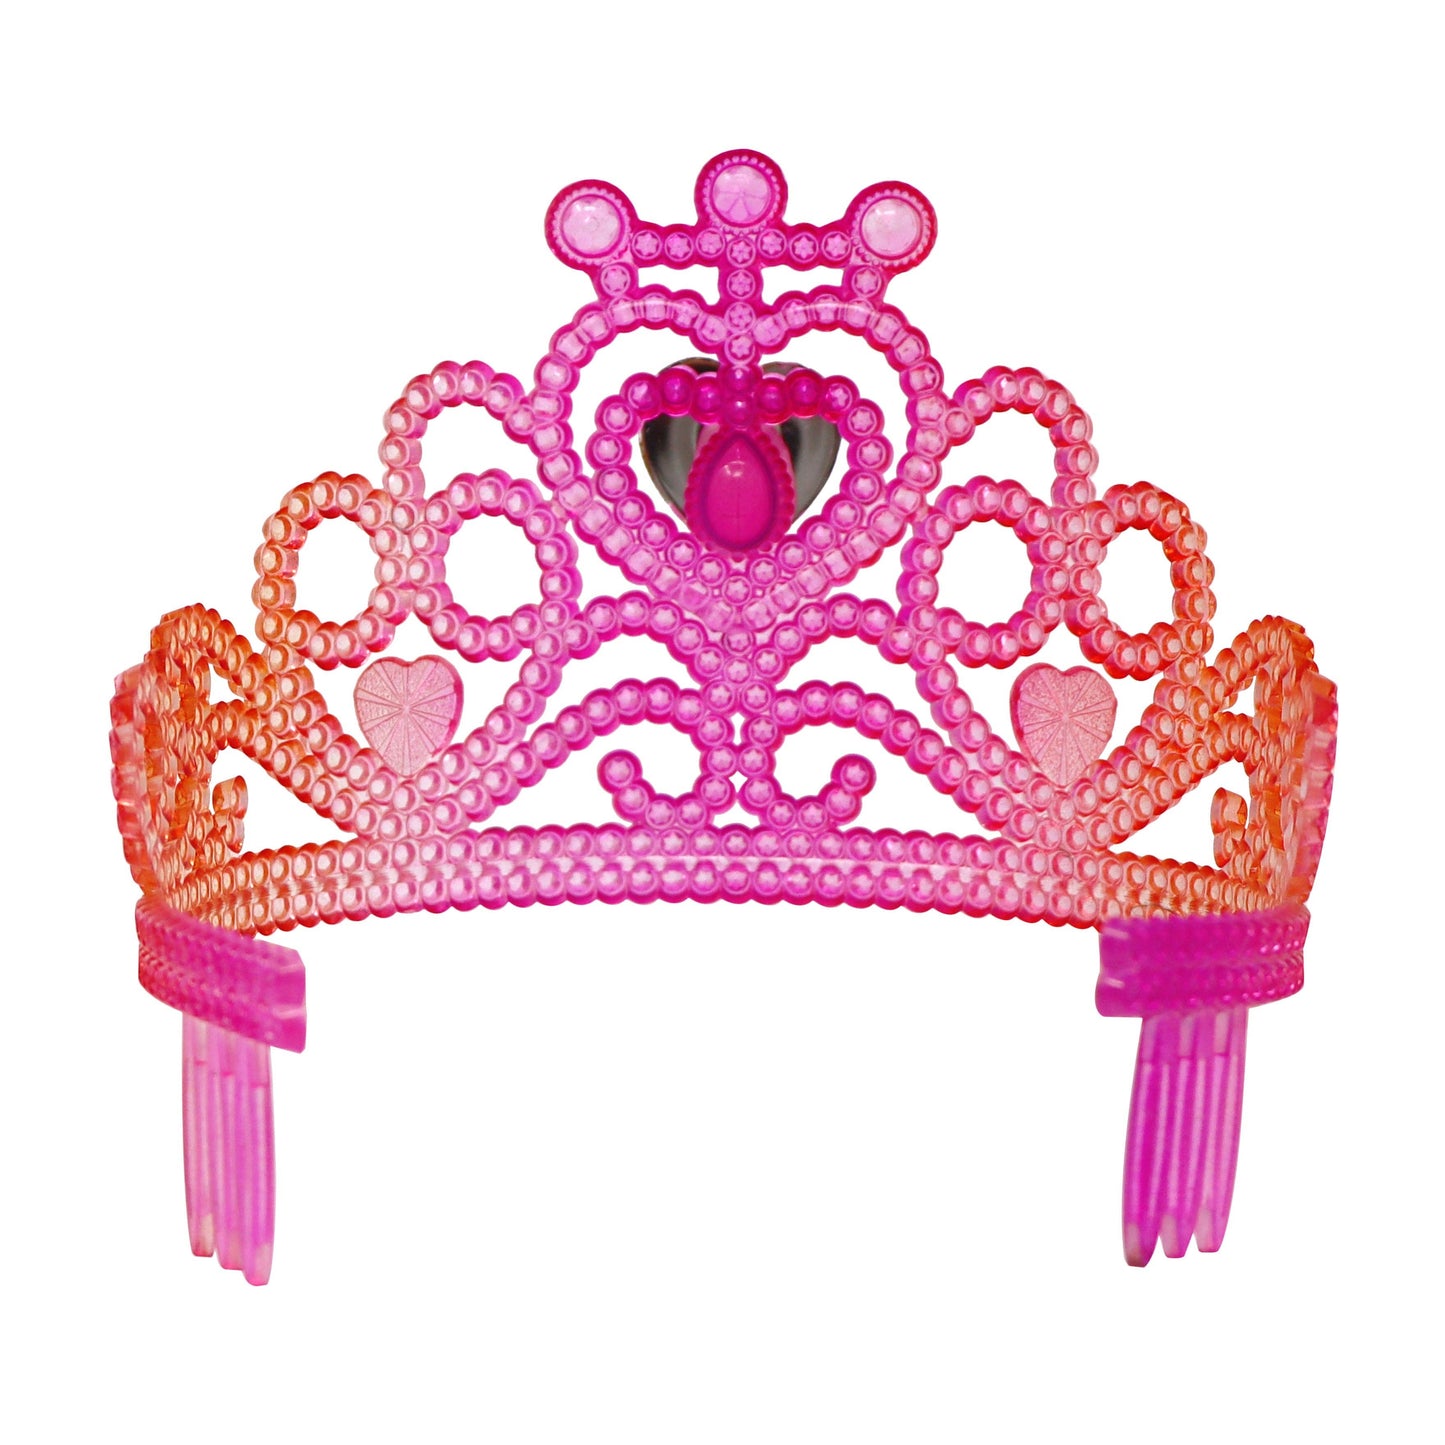 Vibrant Vacation Jewel Heart Crown | Pack of 6